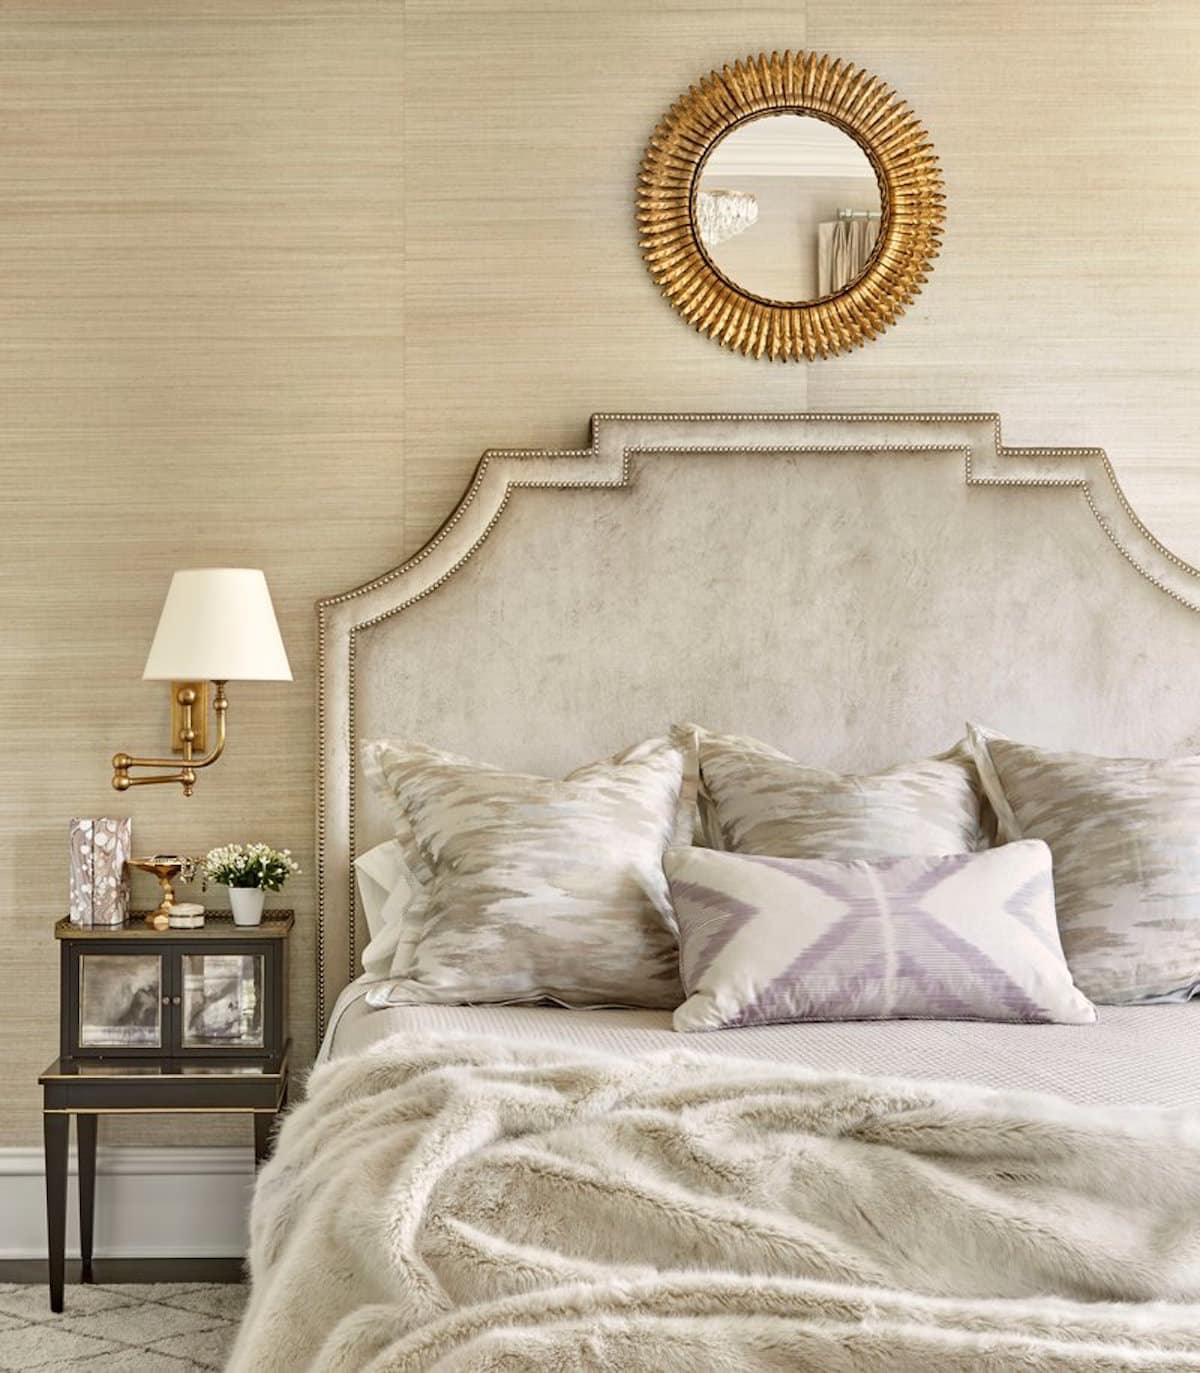 A Chicago bedroom by Summer Thornton.